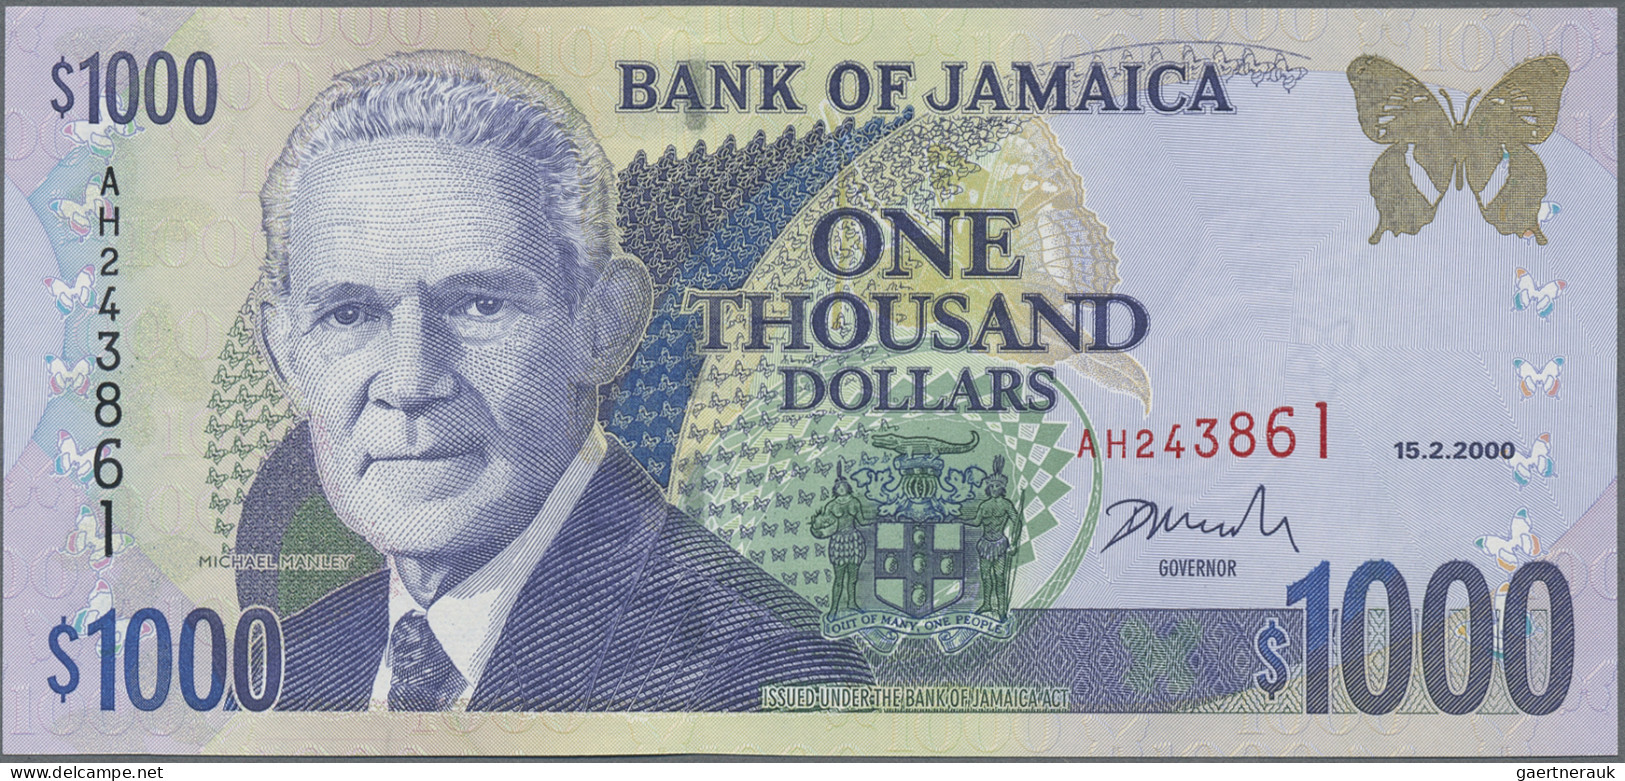 Jamaica: Bank of Jamaica, huge lot with 32 banknotes, series 1969-2012, 1 – 1.00